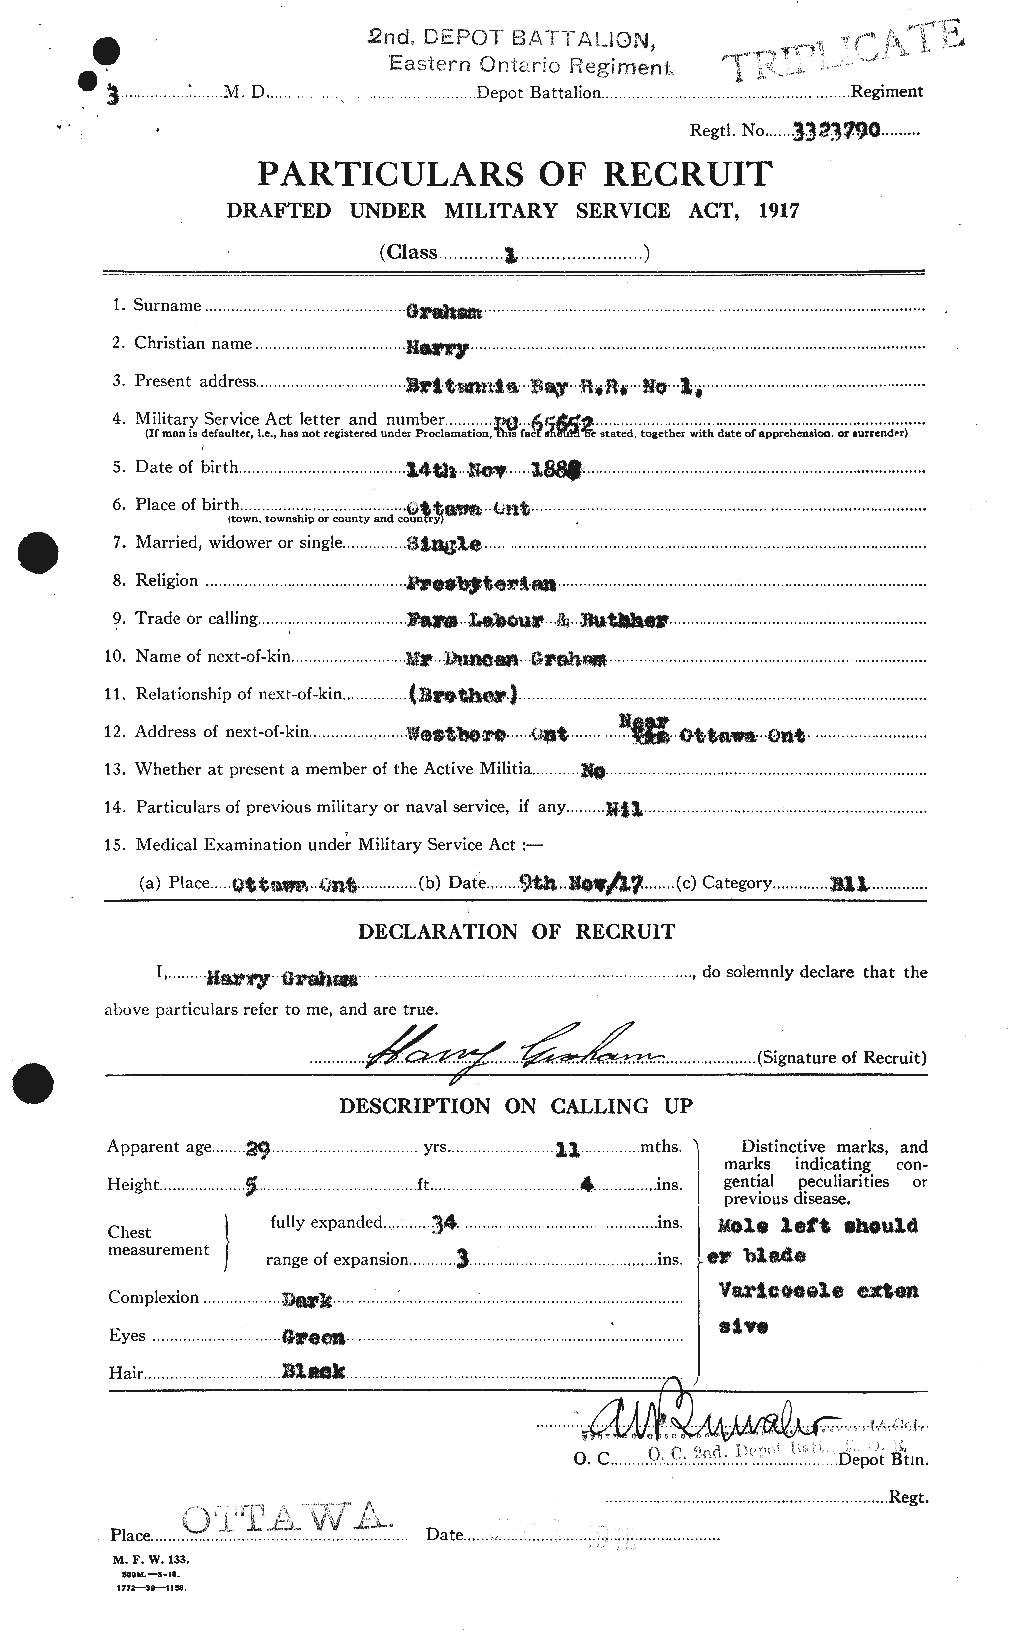 Personnel Records of the First World War - CEF 357711a